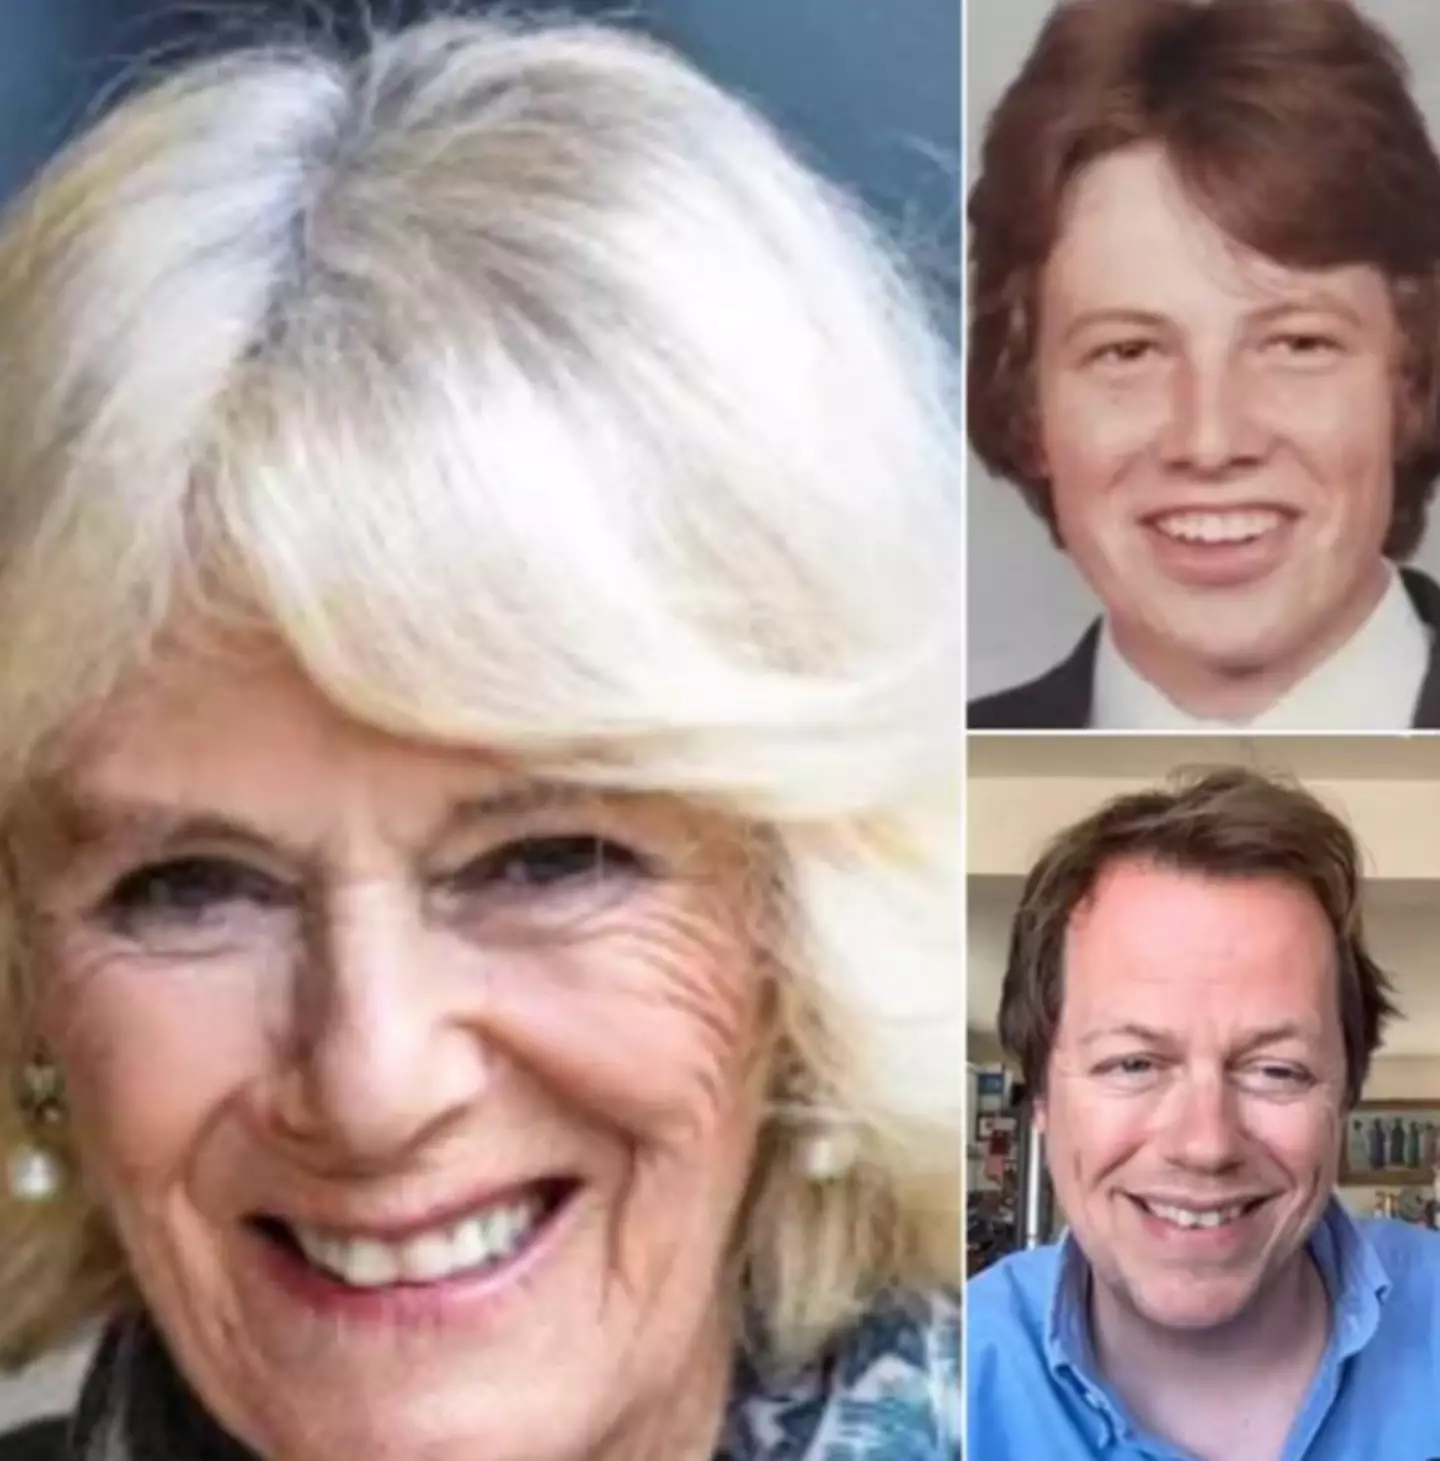 The Queenslander took to Facebook earlier this month to post side-by-side snaps of himself, Camilla and her son Tom Parker Bowles.